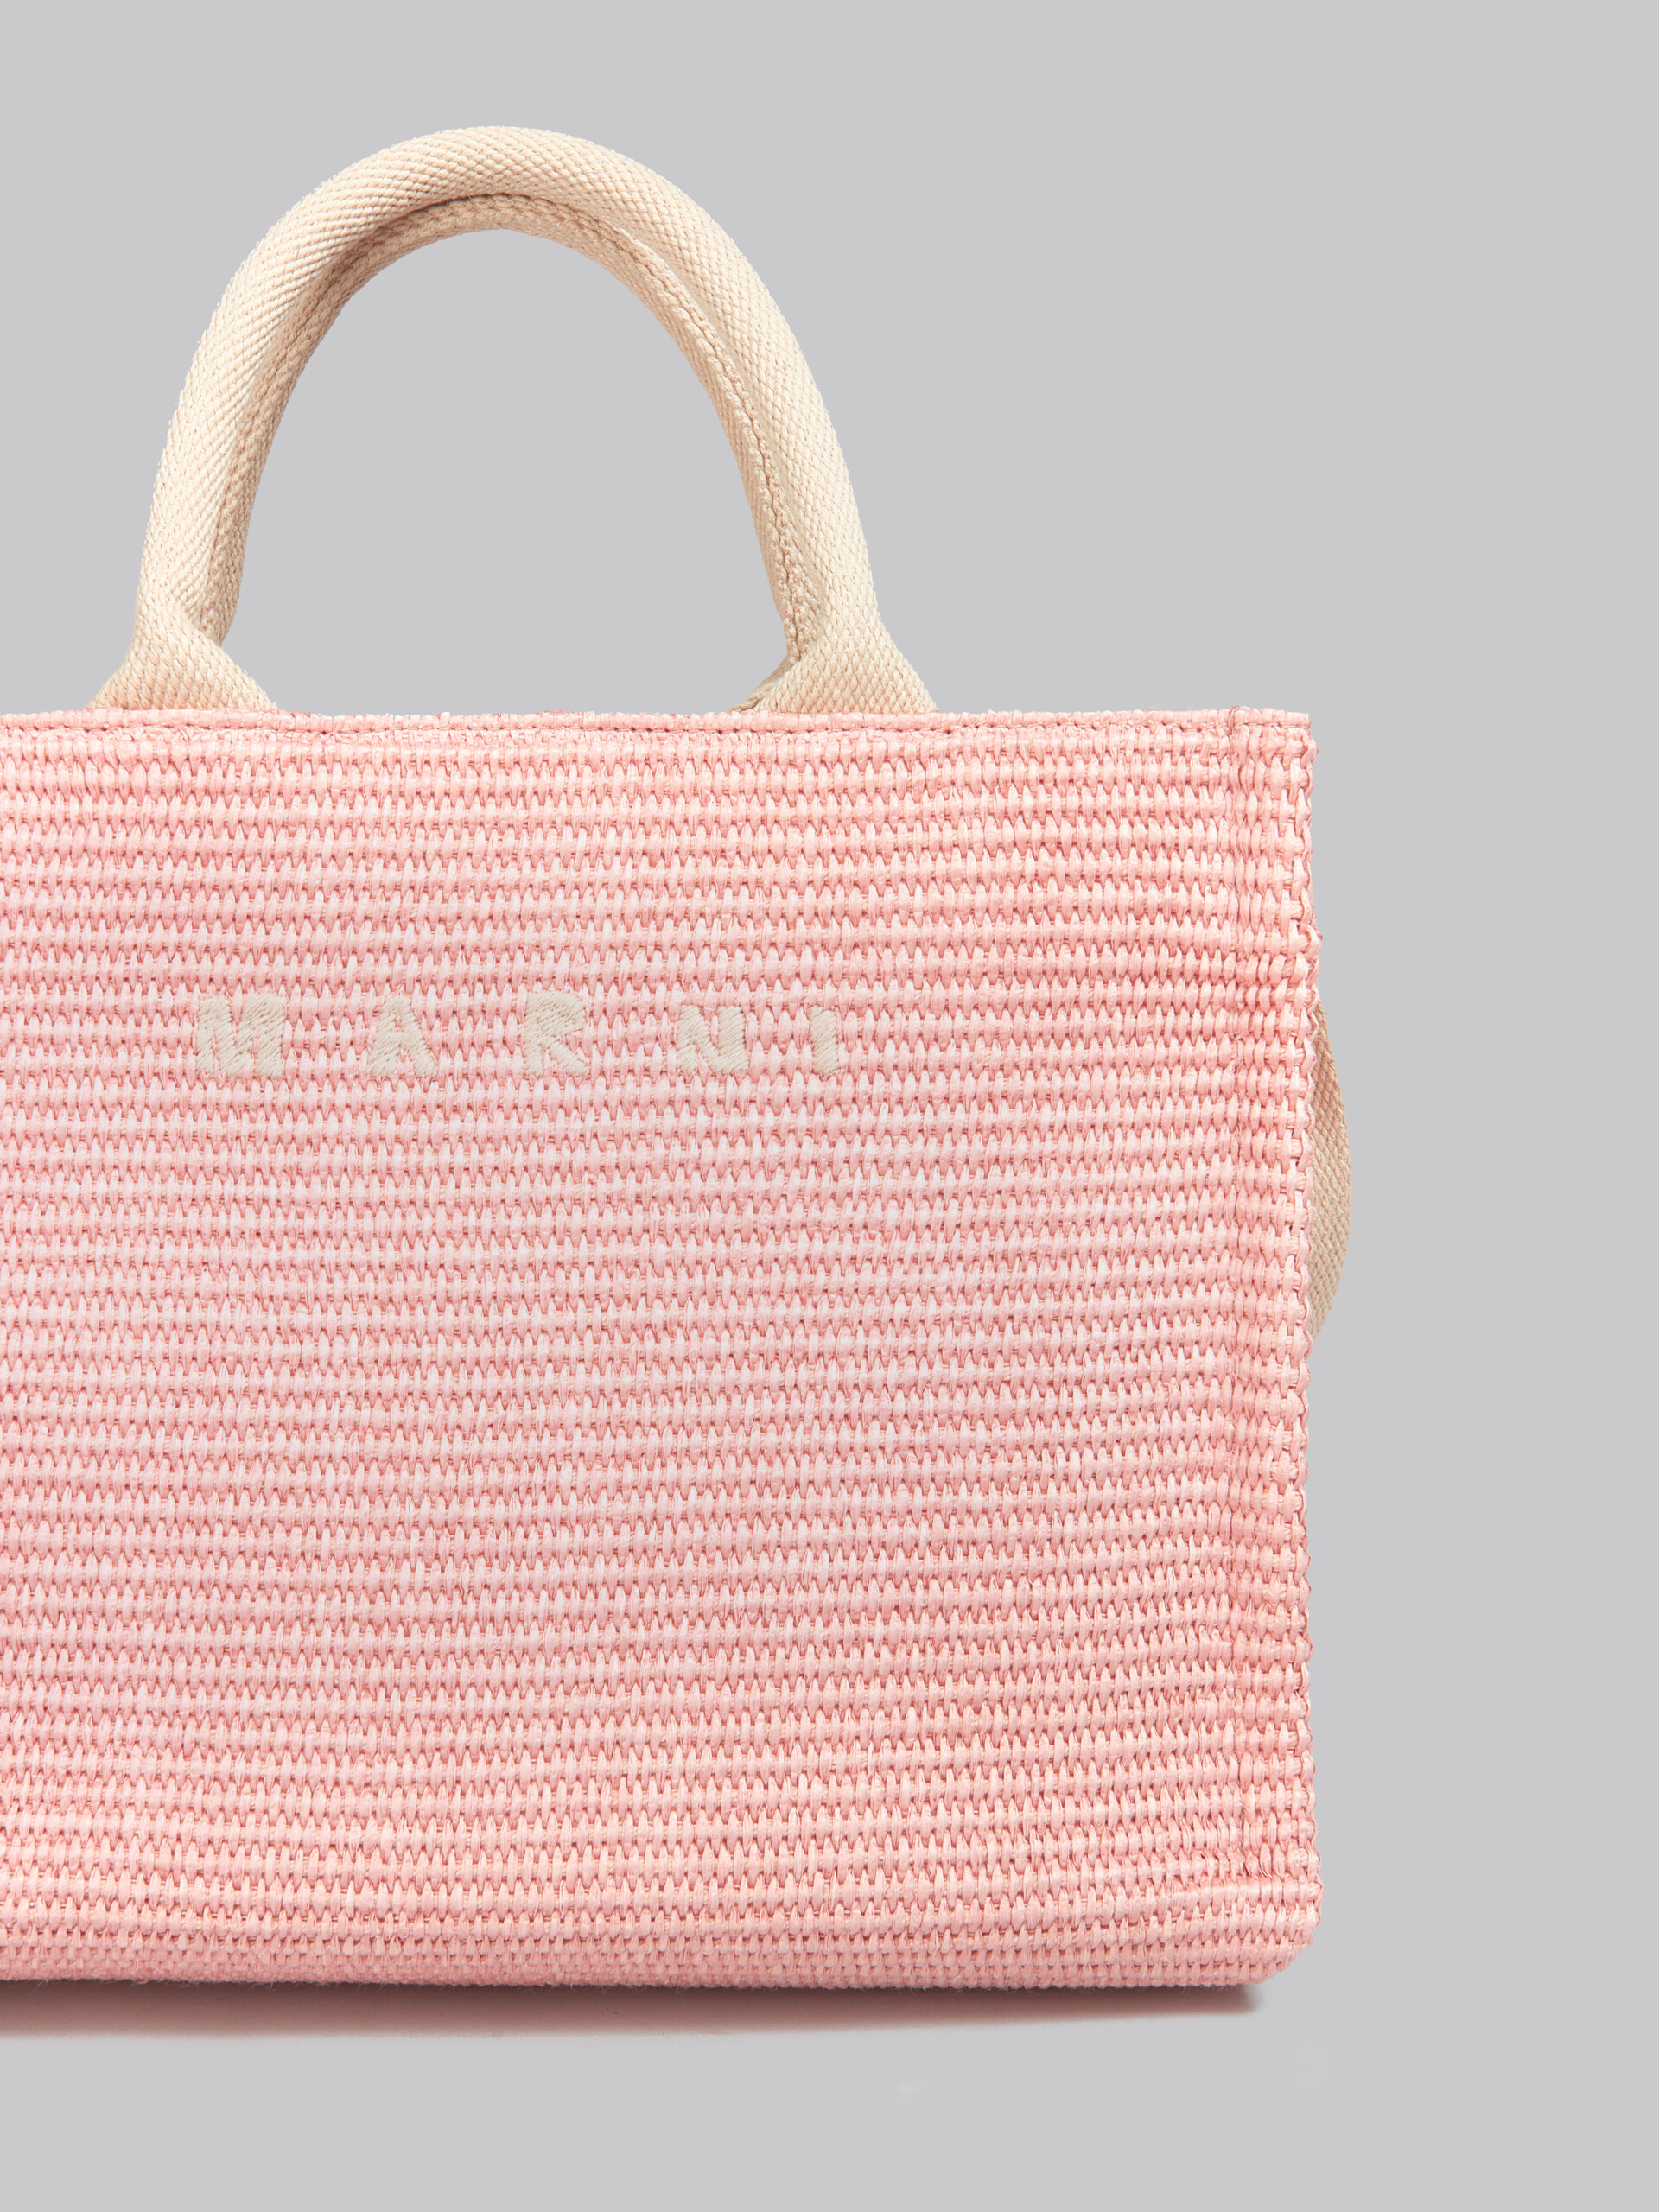 Pink raffia-effect Small Tote Bag - Shopping Bags - Image 5